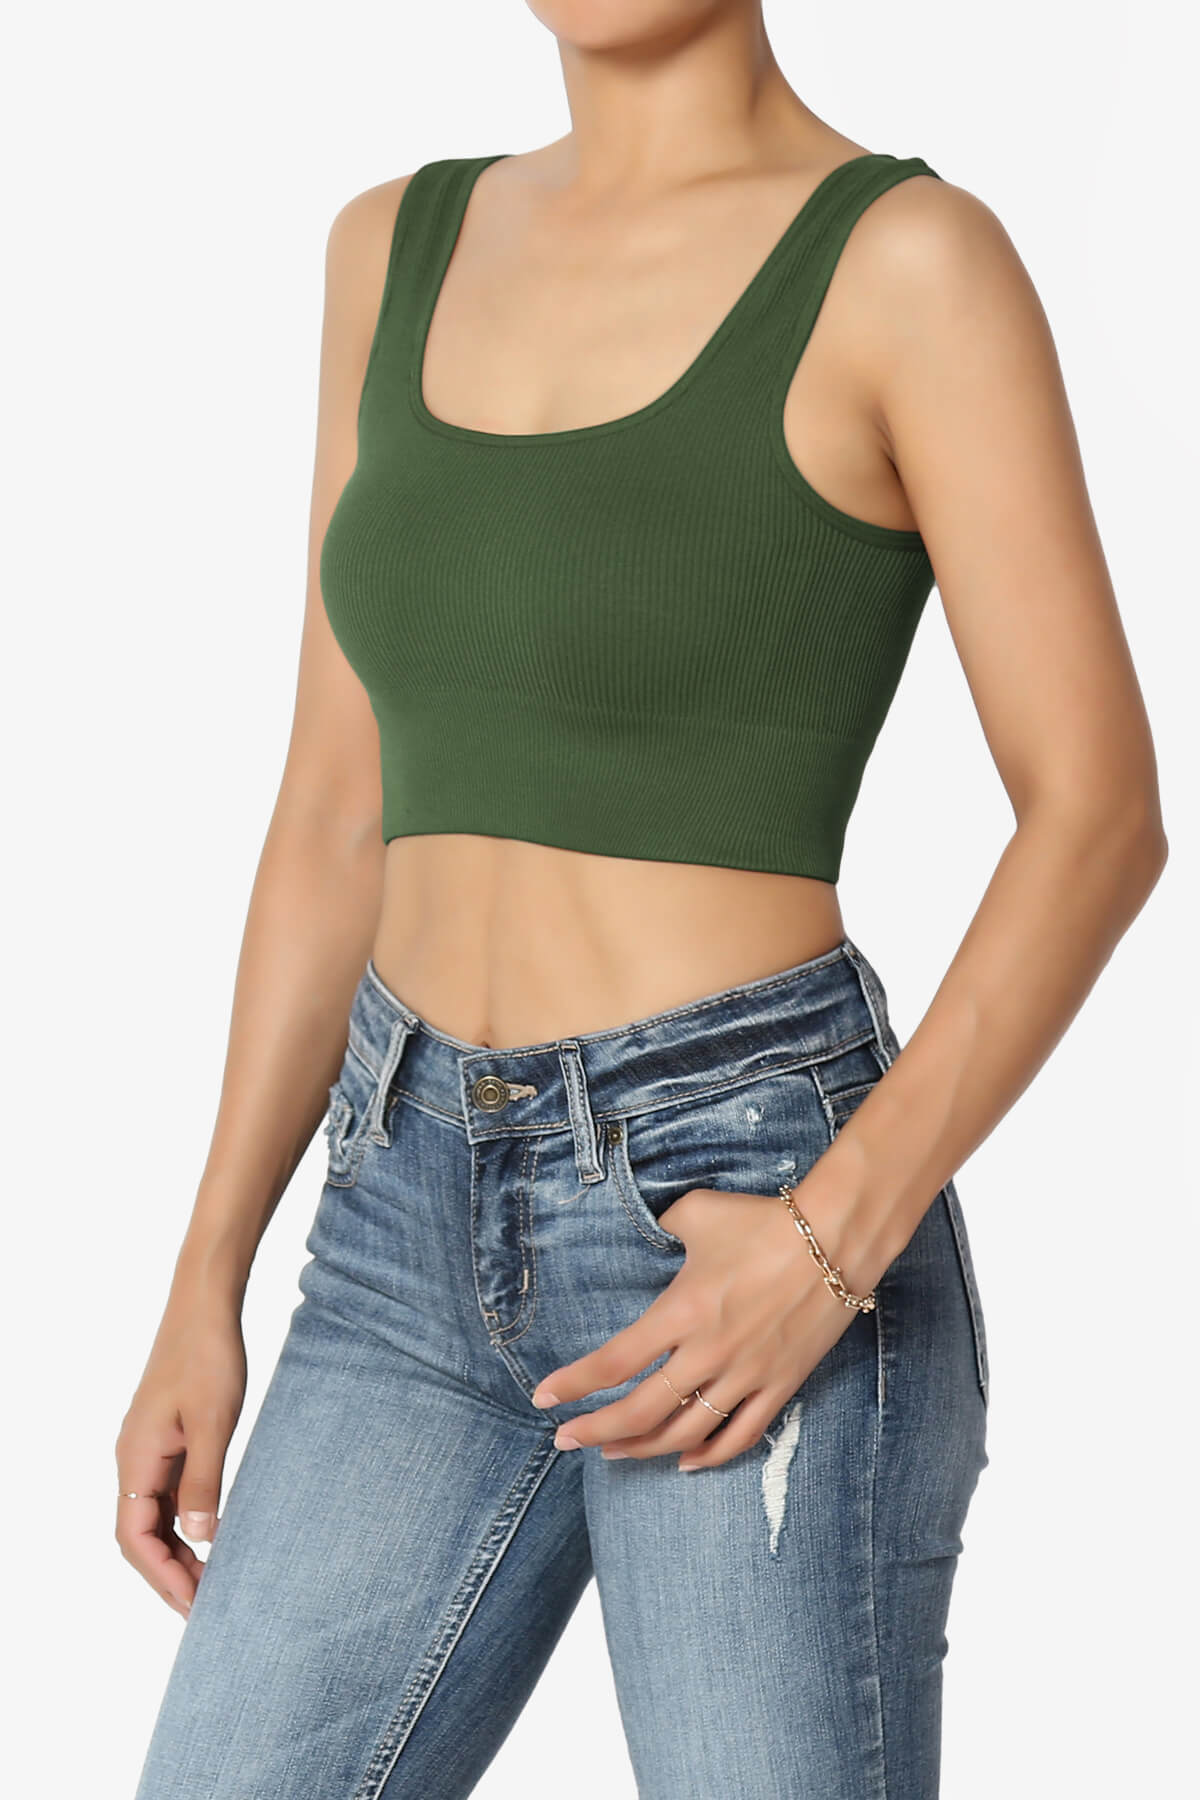 PMUYBHF Tank Tops for Women 2024 Built in Bra Cropped Square Neck